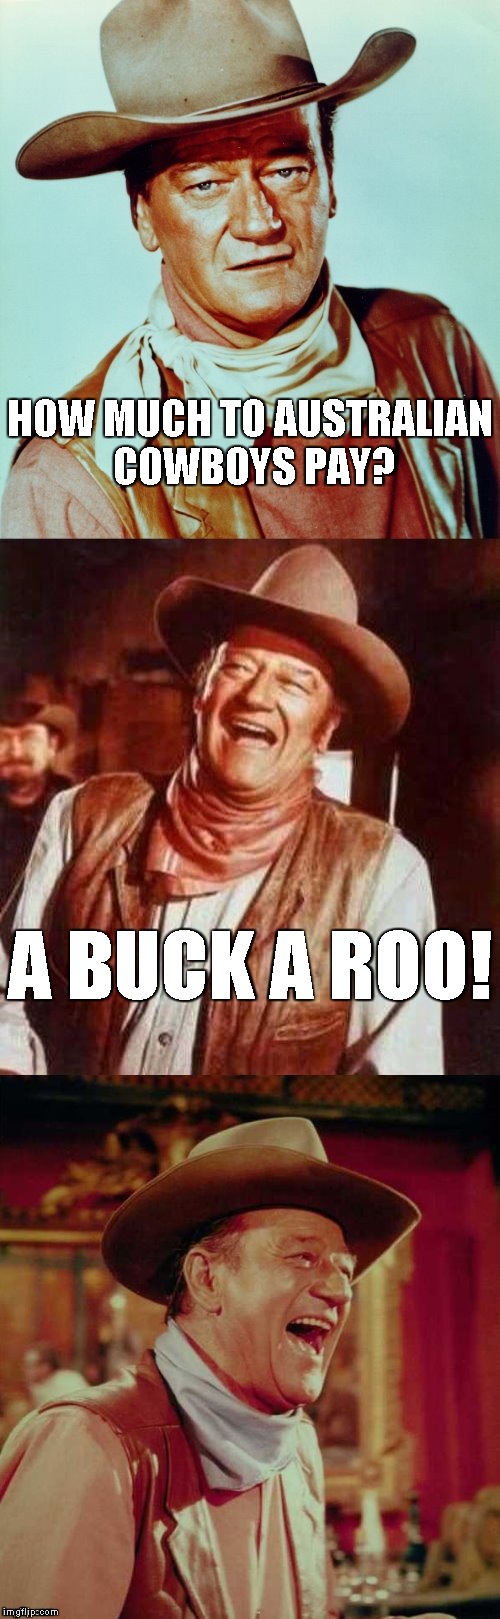 Thanks for the template DashHopes! | HOW MUCH TO AUSTRALIAN COWBOYS PAY? A BUCK A ROO! | image tagged in john wayne puns,memes,australia,australians,cowboy,cowboys | made w/ Imgflip meme maker